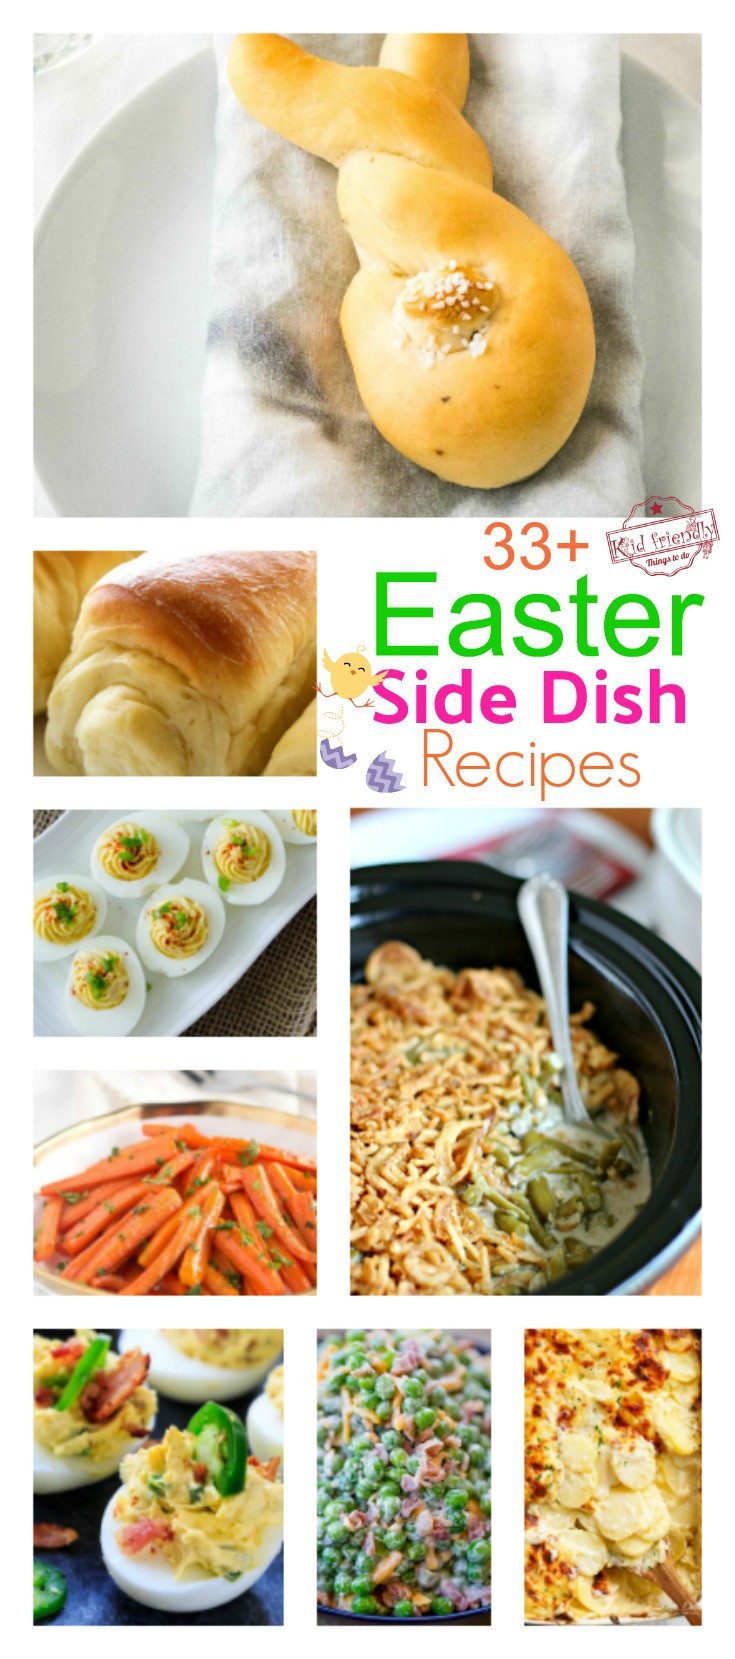 Easy Side Dishes For Easter
 Over 33 Easter Side Dish Recipes for Your Celebration Dinner